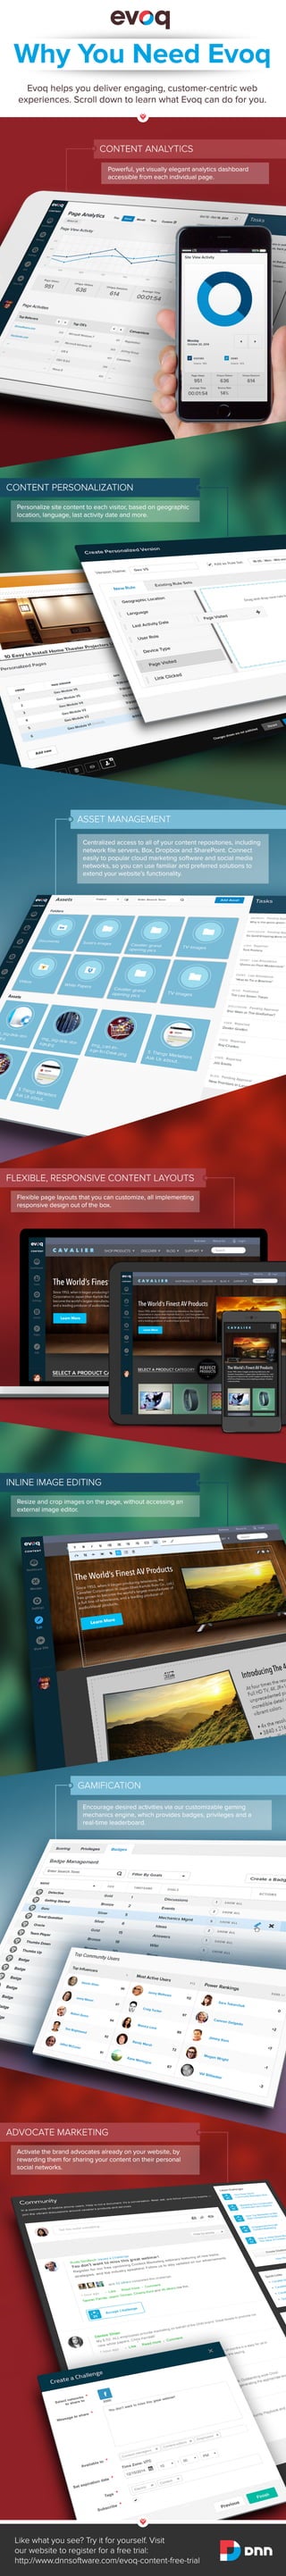 Create Engaging Web Experiences with Evoq